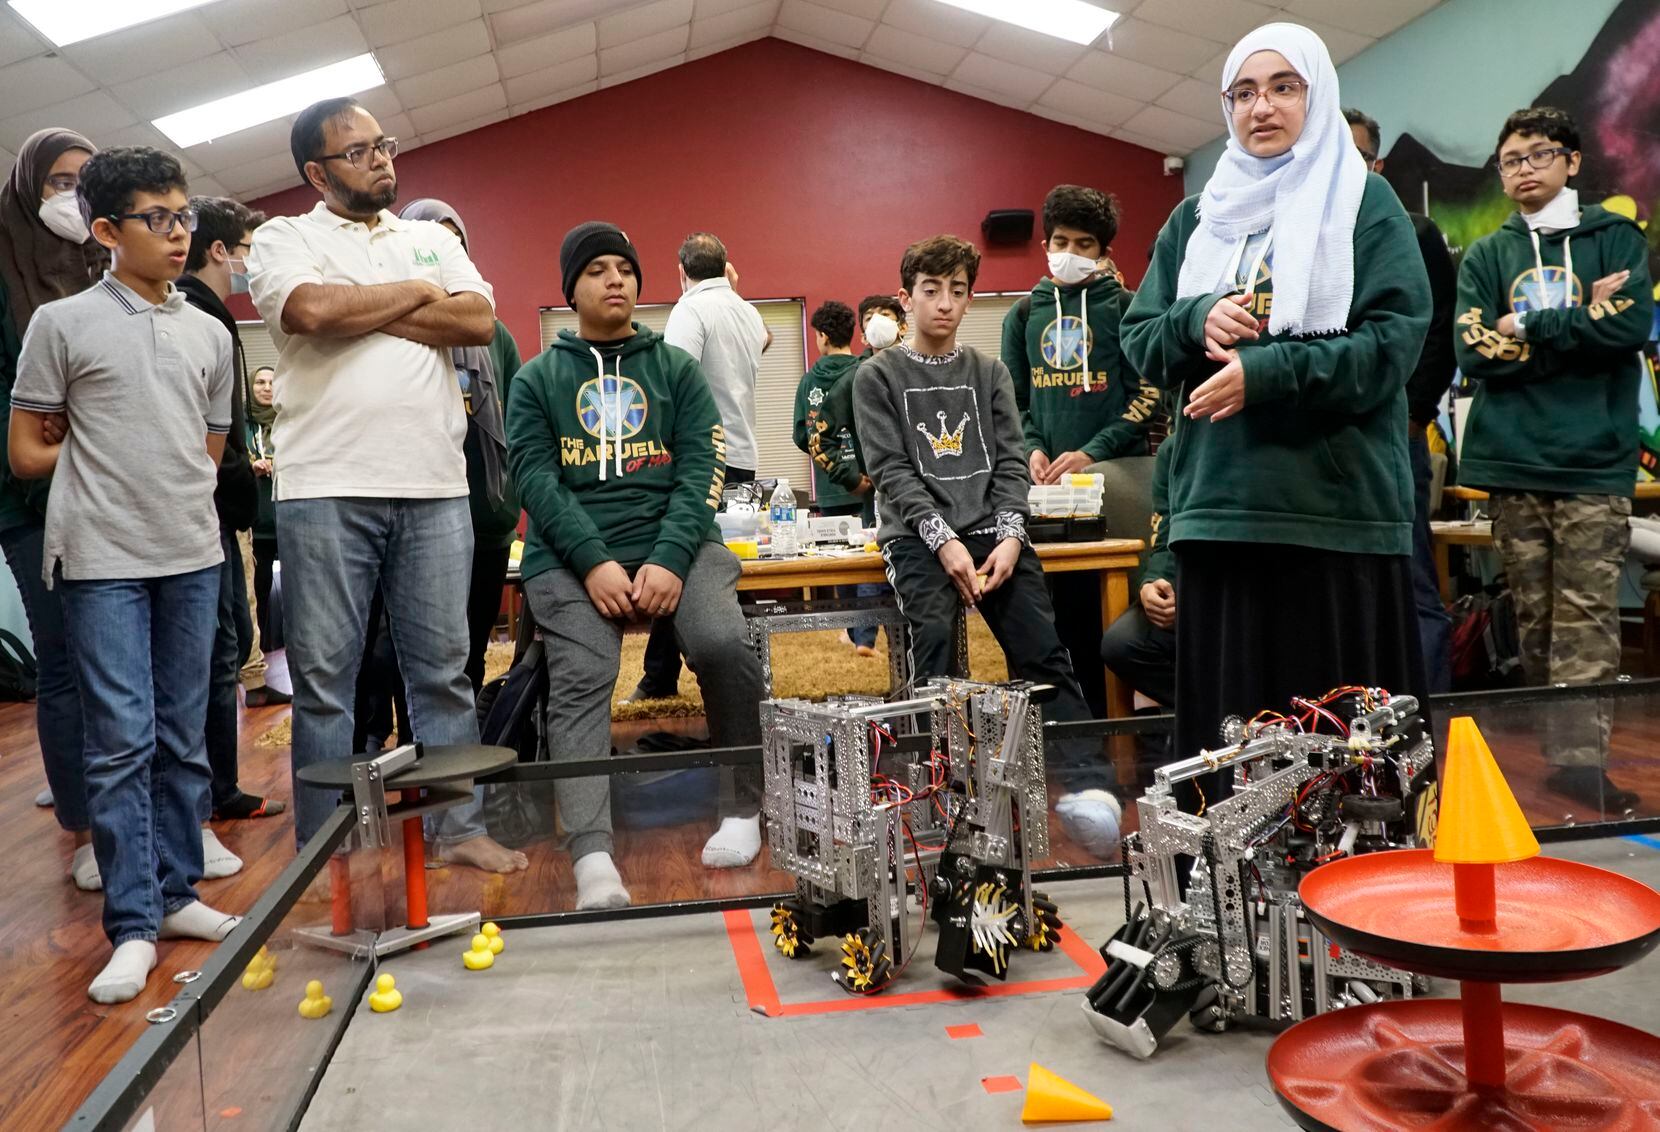 Roofaida Hanoun, 16, speaks to robotics team members about the process of building a robot...